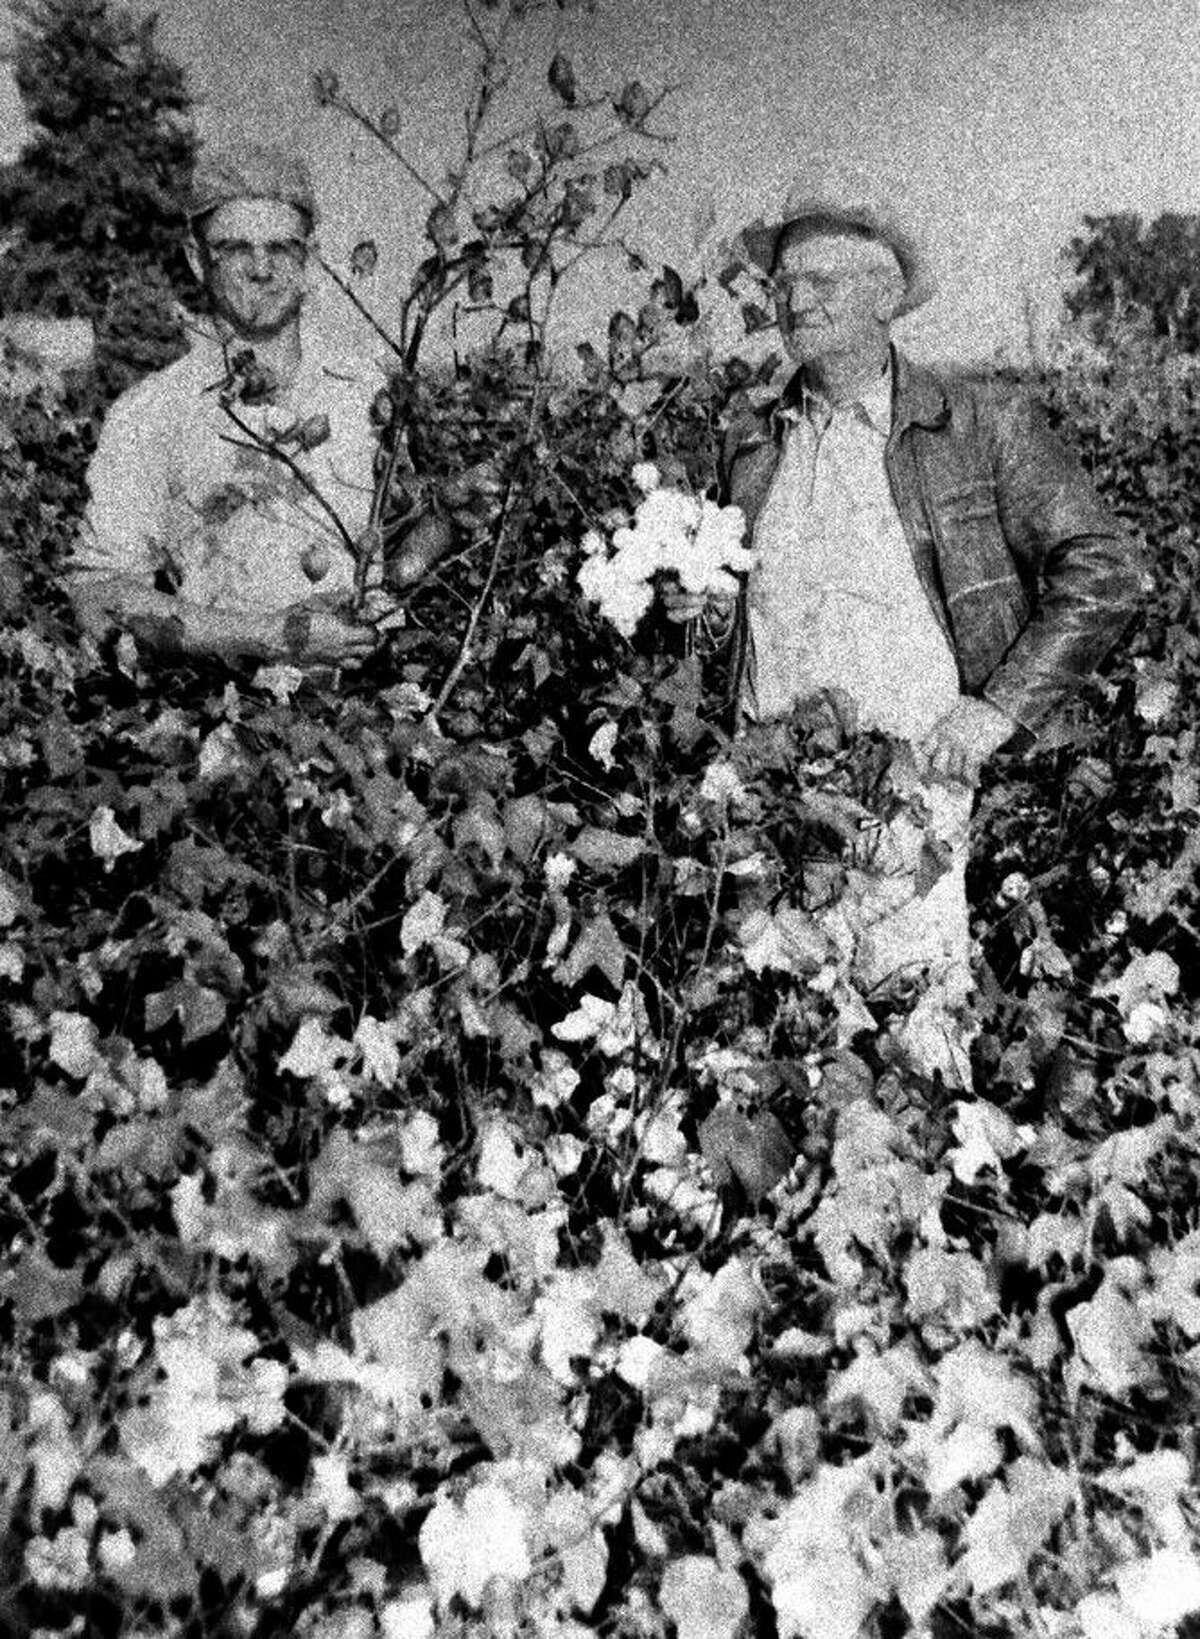 Herald File Photo This photo, originally published on the front page Oct. 24, 1954, shows Donald Ebeling (left) and his father, Ernest Ebeling, examining a cotton stalk from a field west of Plainview that yielded more than a bale of the acre in its first pulling and which was expected to yield a total of two bales per acre after a second harvest.